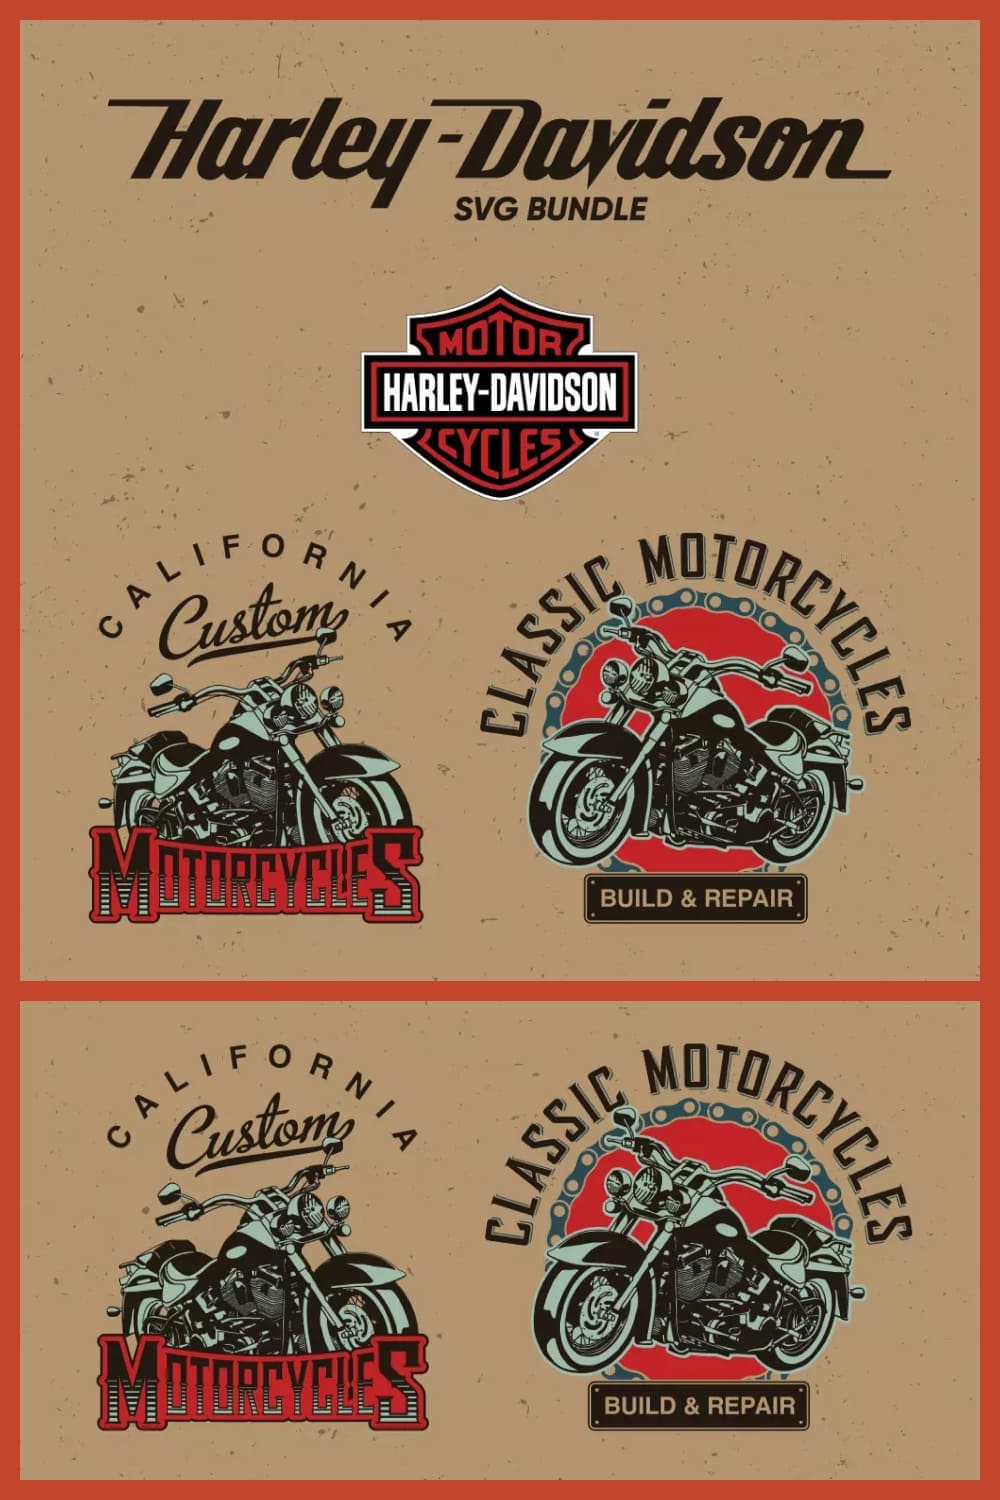 Collage with Harley Davidson motorcycles images.